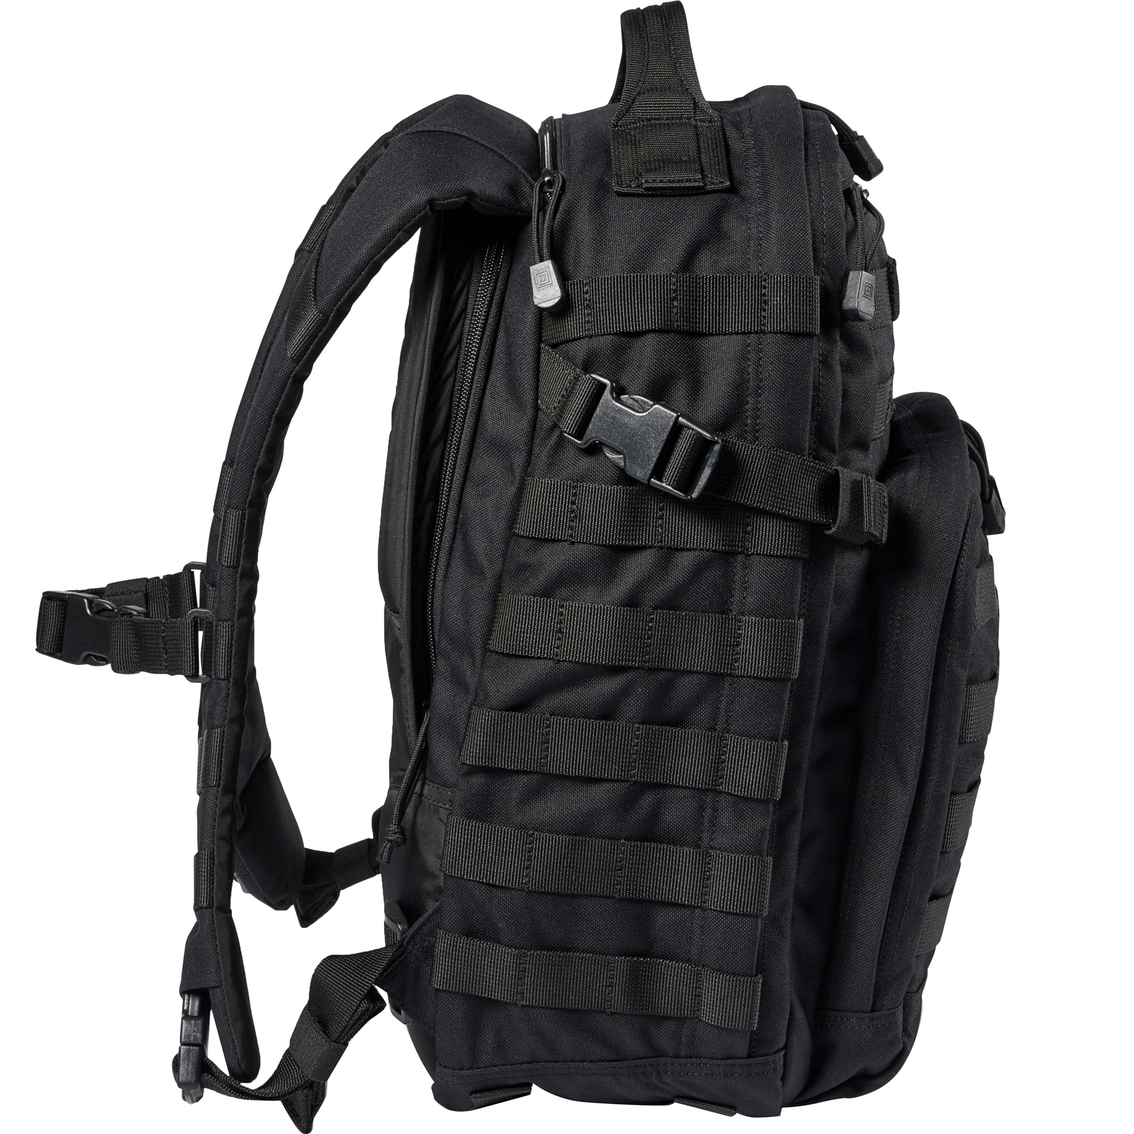 5.11 RUSH 12 2.0 Backpack - Image 5 of 10